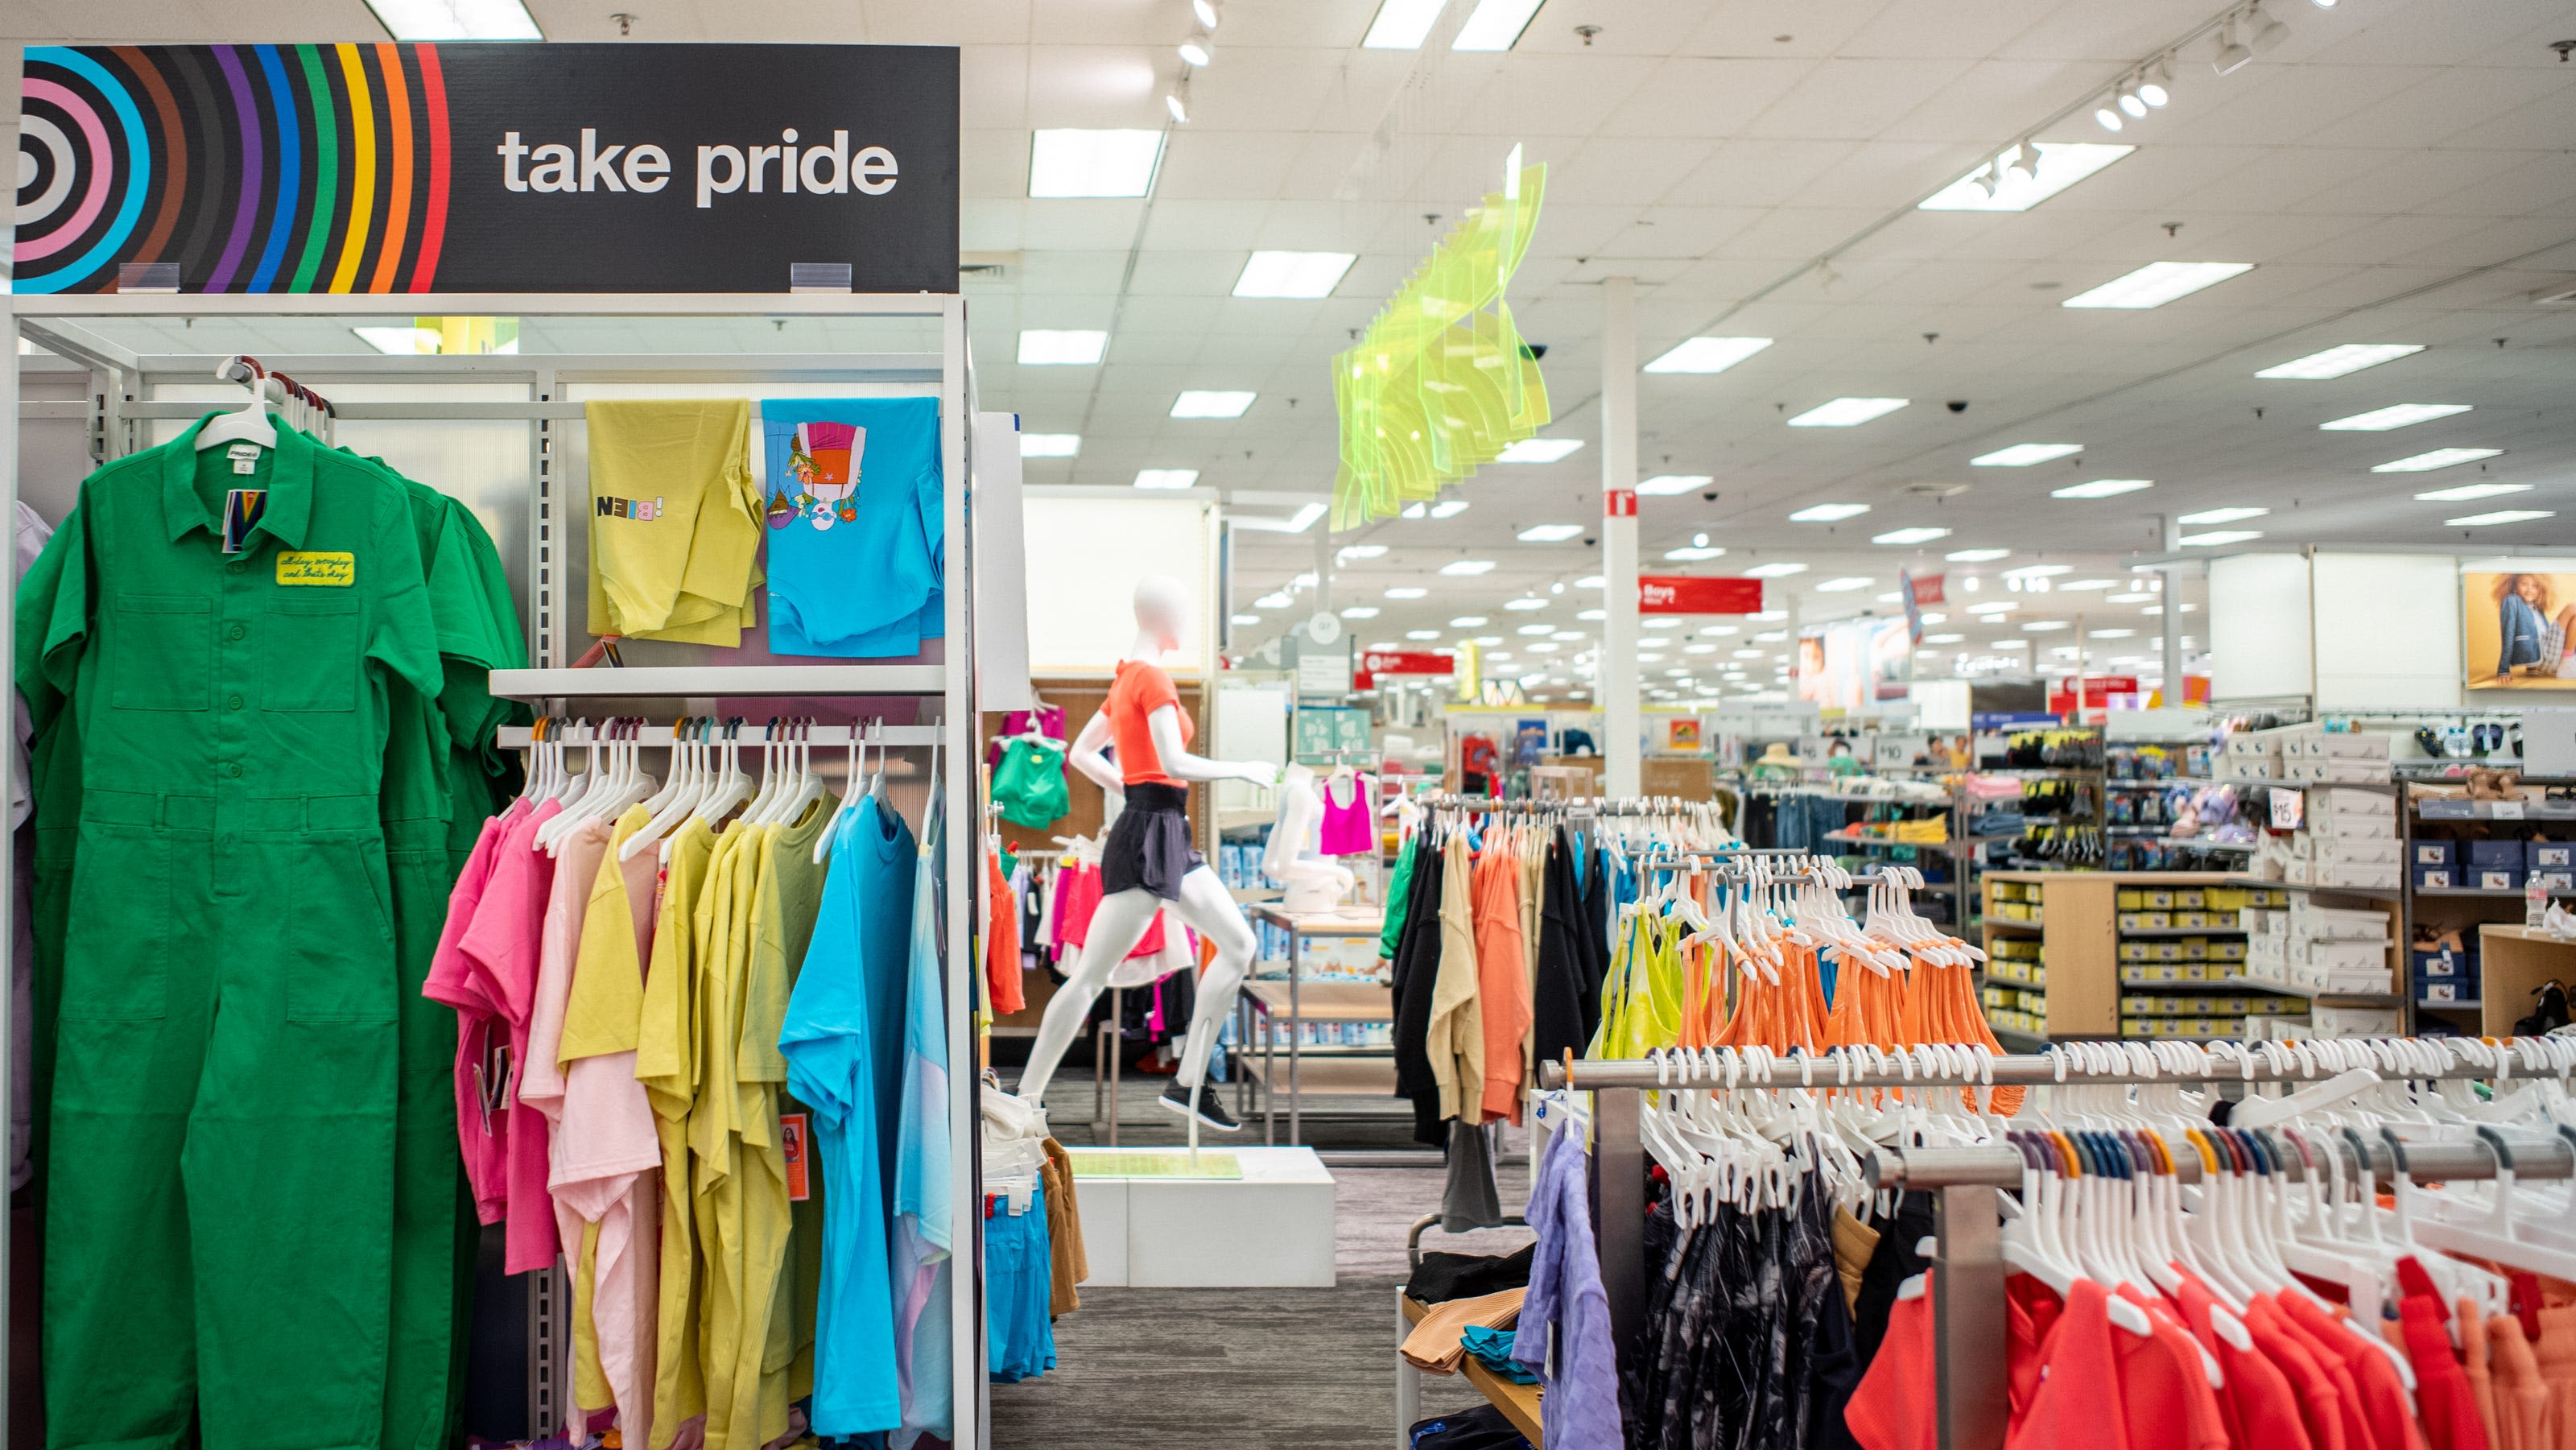 Expect fewer rainbow logos for LGBTQ Pride Month after Target, Bud Light backlash